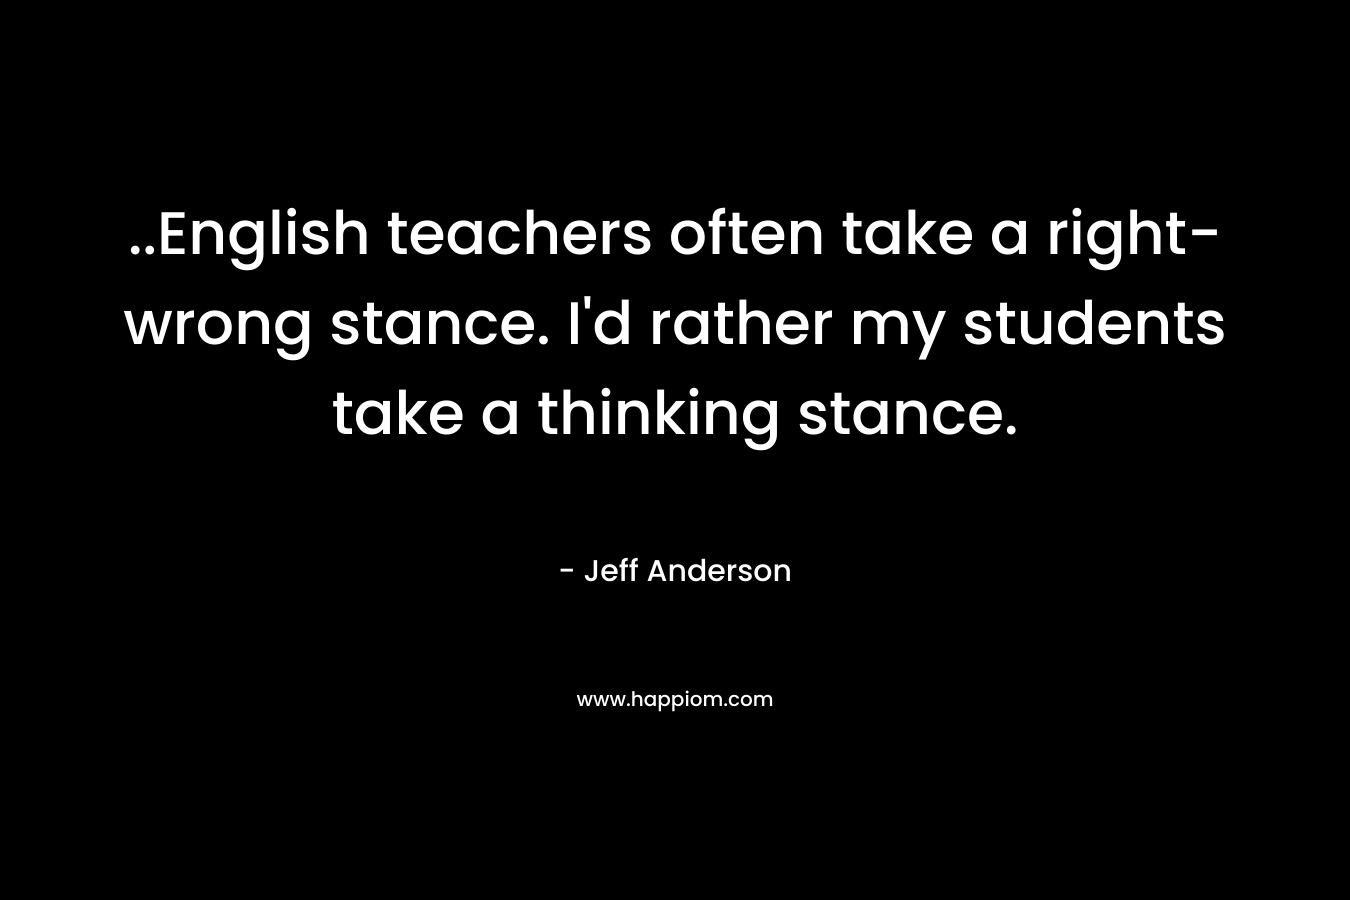 ..English teachers often take a right-wrong stance. I’d rather my students take a thinking stance. – Jeff Anderson